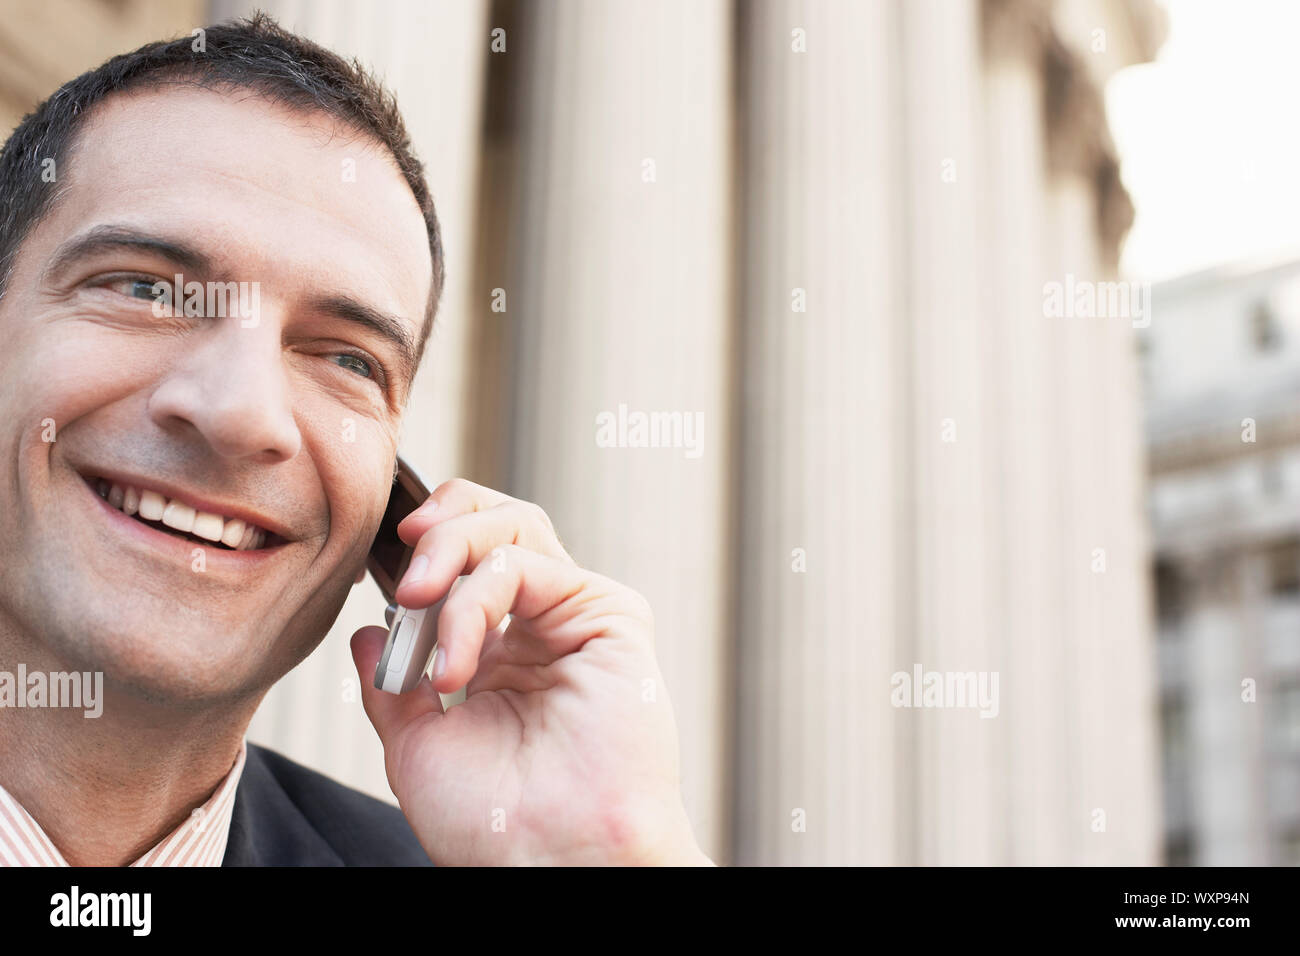 Closeup of happy businessman using cell phone outdoors Stock Photo